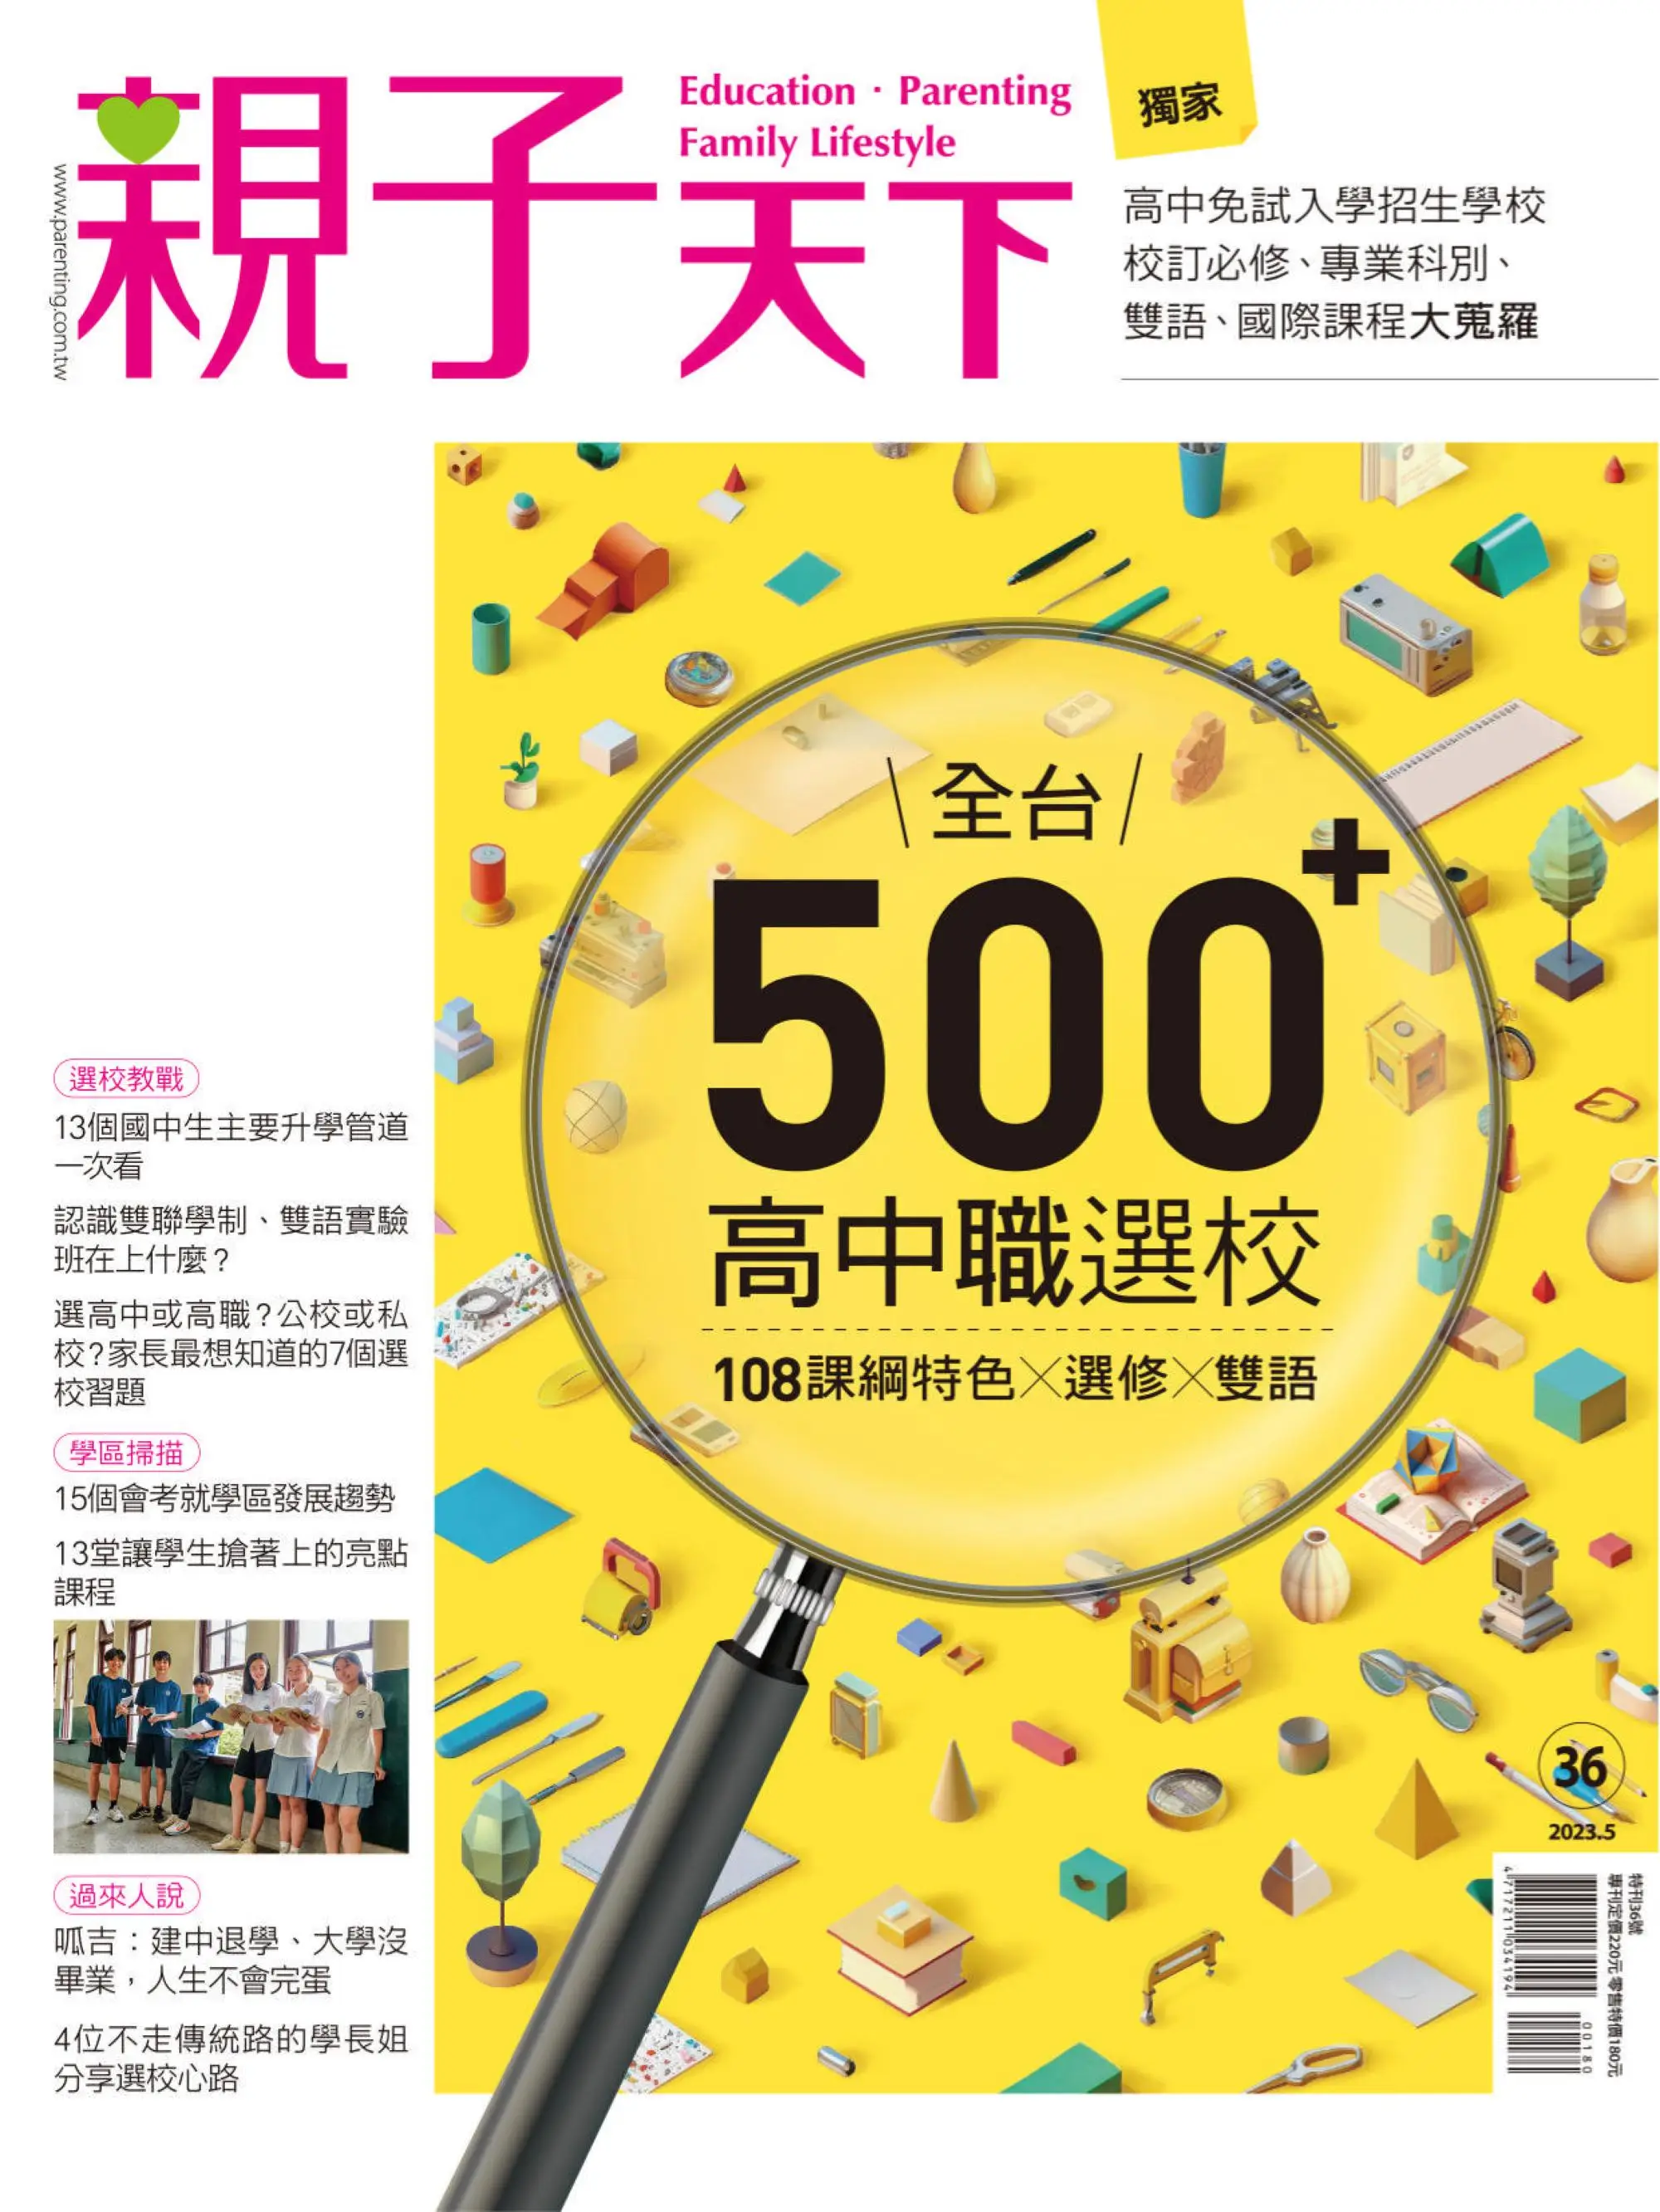 CommonWealth Parenting Special Issue 親子天下特刊 2023年六月 09, 